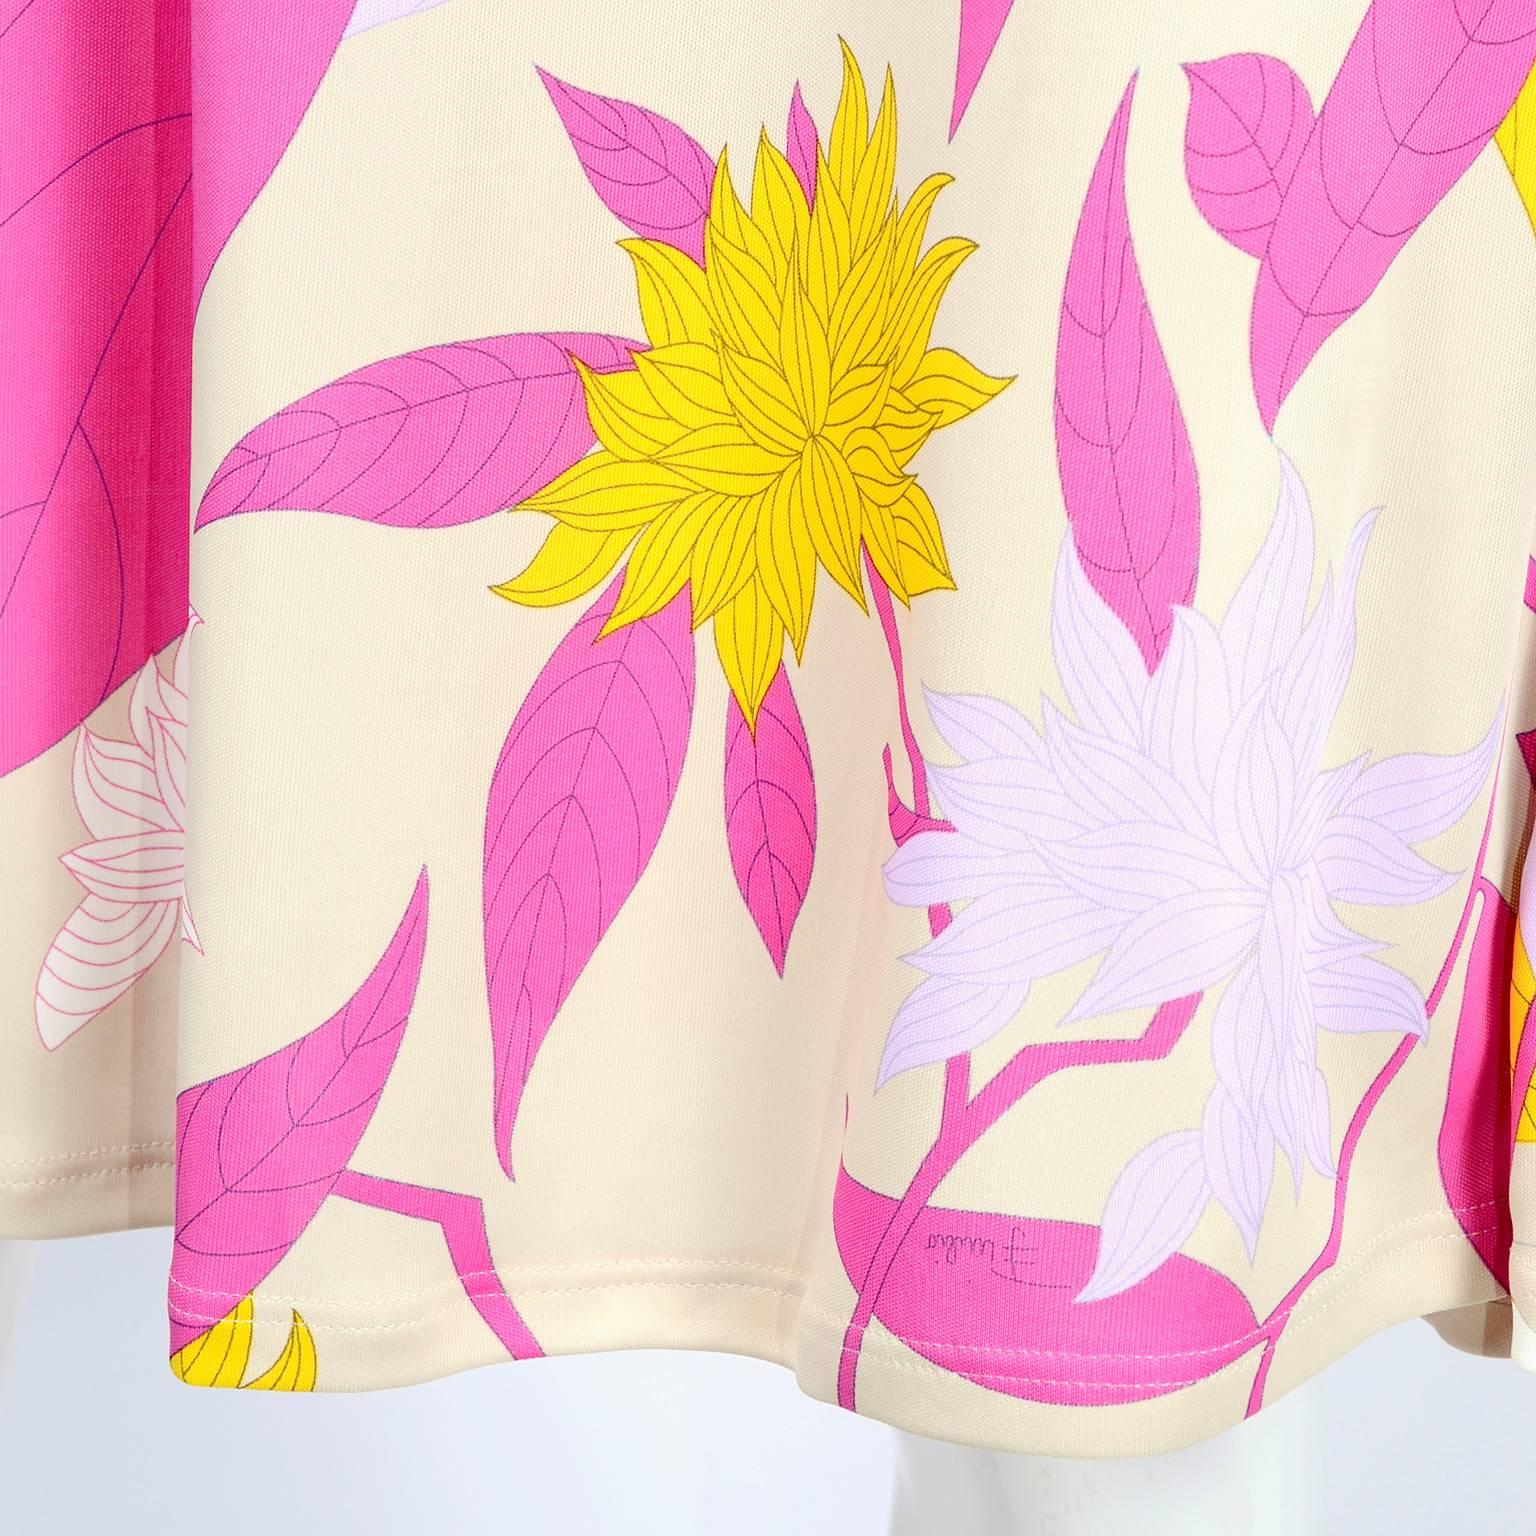 This is a Pucci rayon jersey floral leaf print dress in shades of pink, cream, yellow and lavender.  The dress was designed by Matthew Williamson for Pucci and made in Italy in 2009 and is labeled an Italian size 44, French size 40, US size 10, and